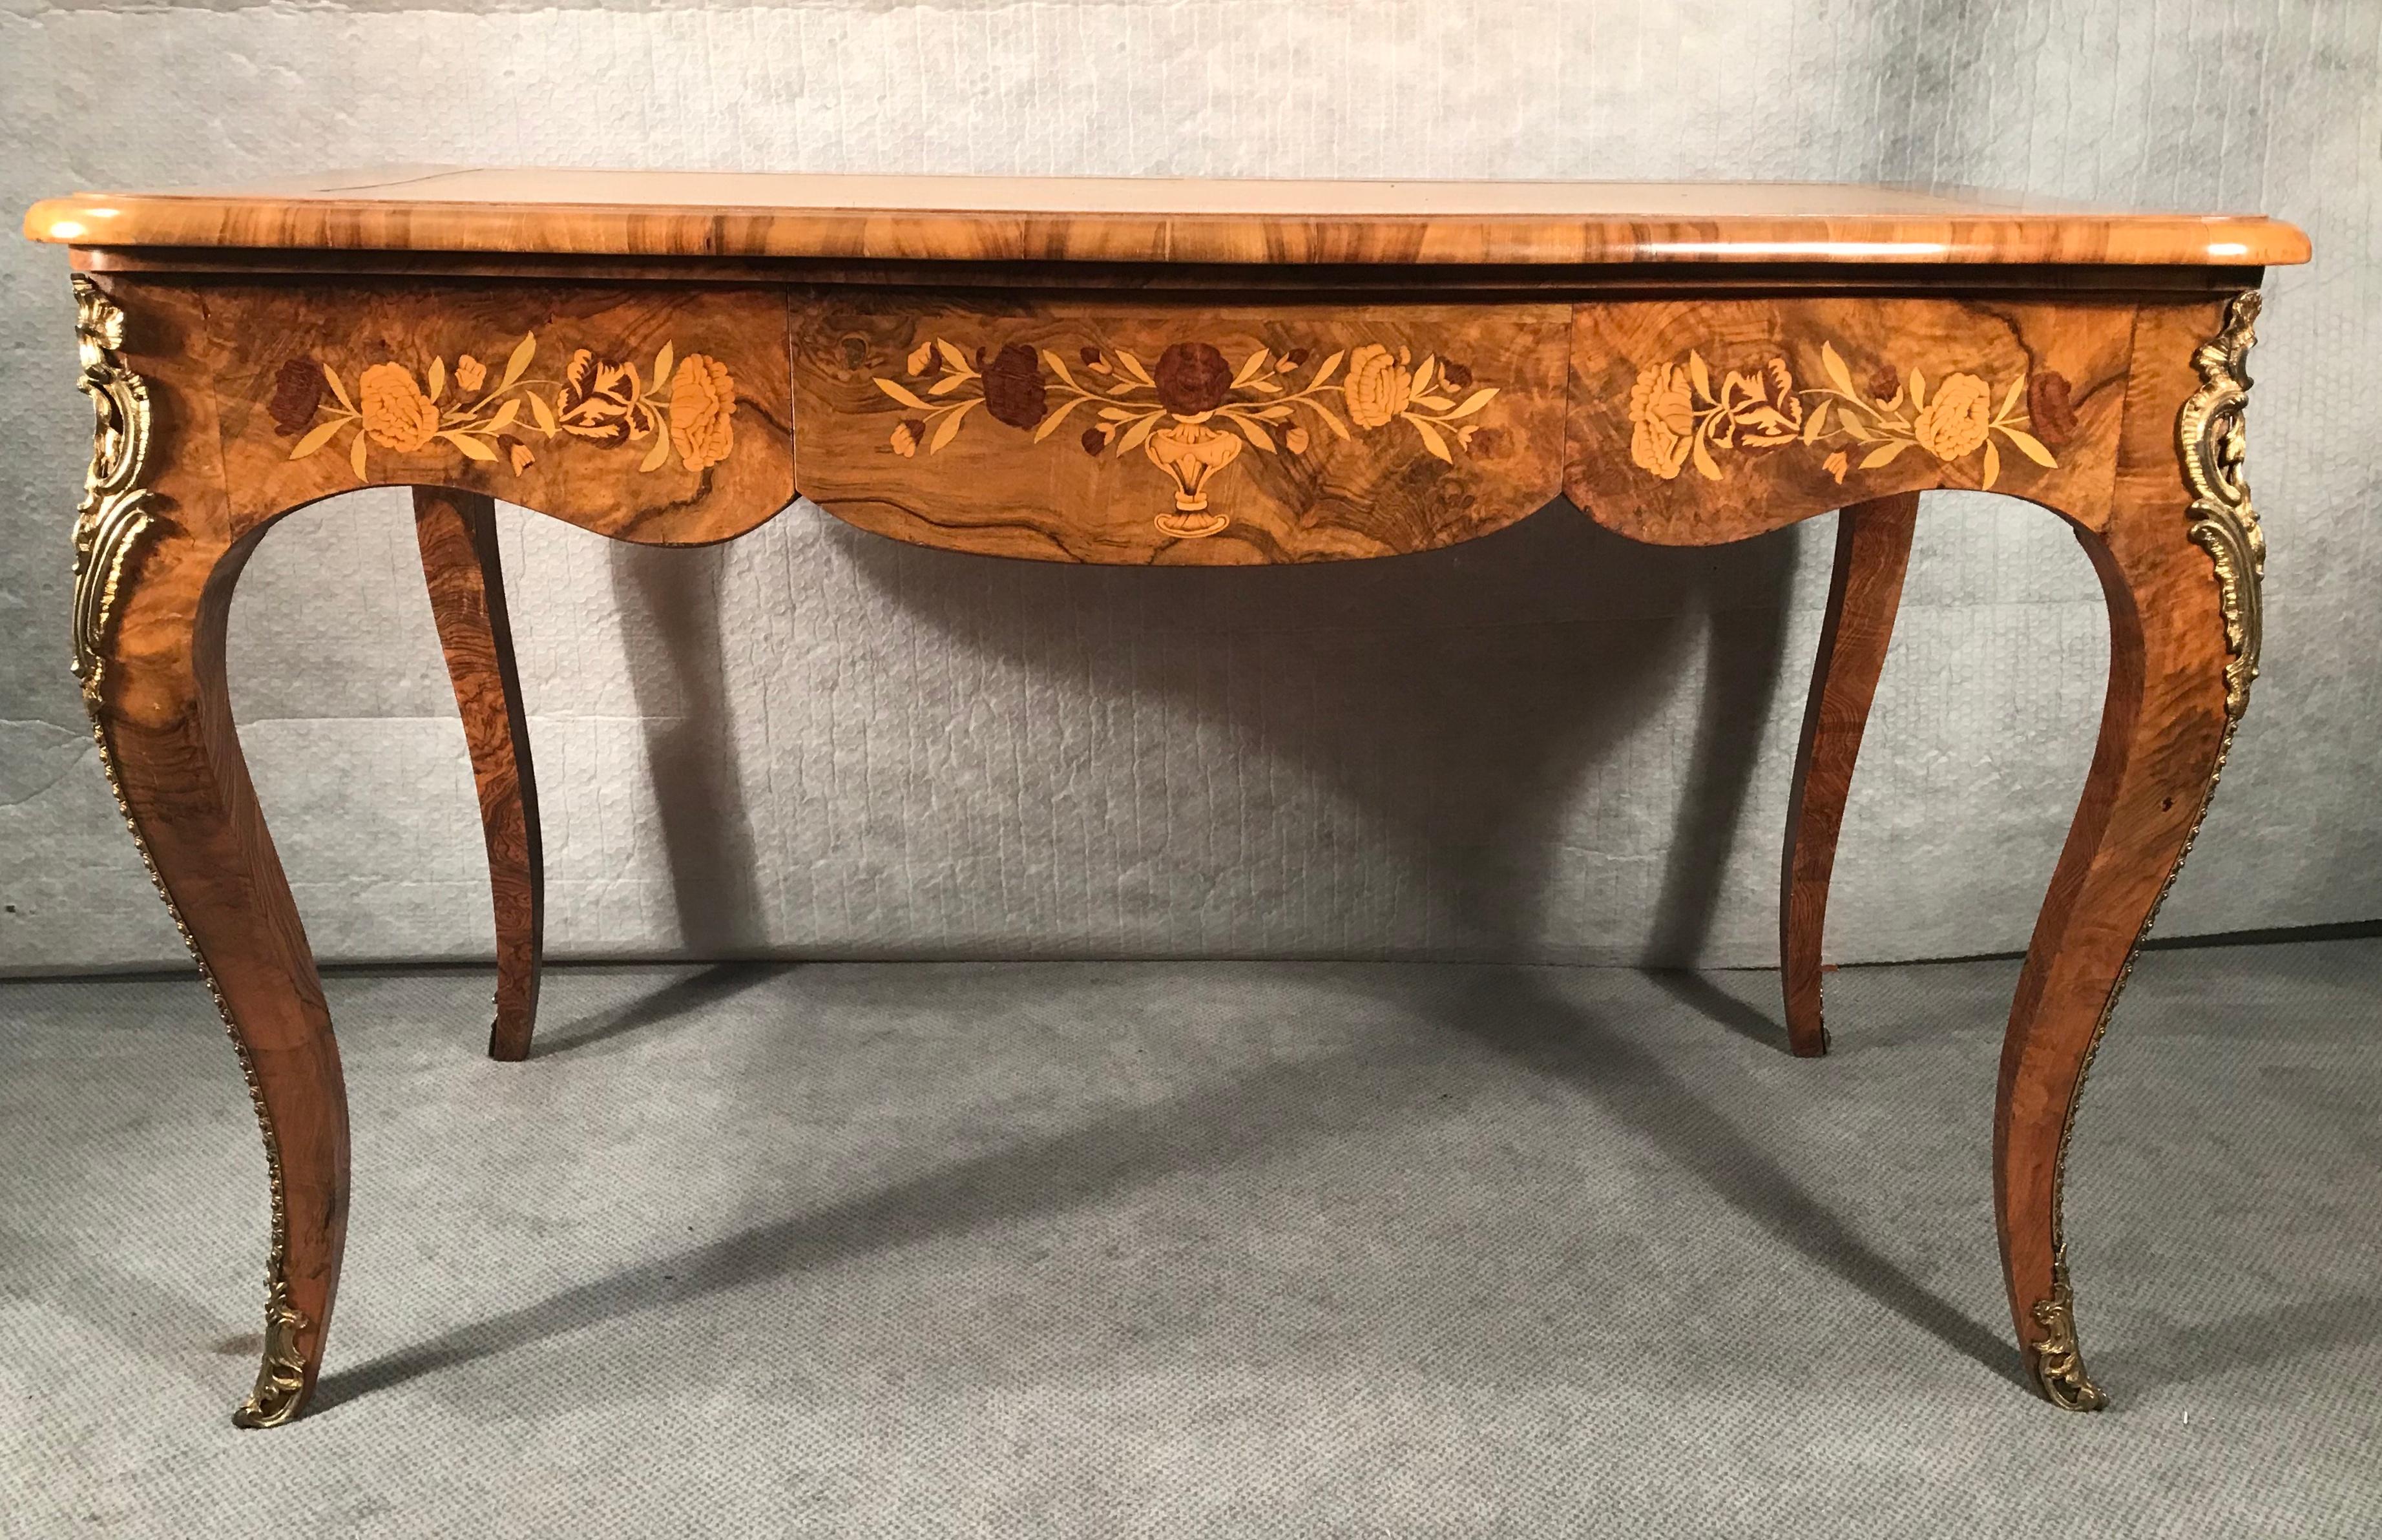 Louis XV style desk, France circa 1890, walnut veneer with flower marquetry in elm and maple. The top is partially covered with leather. It is designed to Stand against a wall. The table is in good original condition. It ships from Germany, shipping